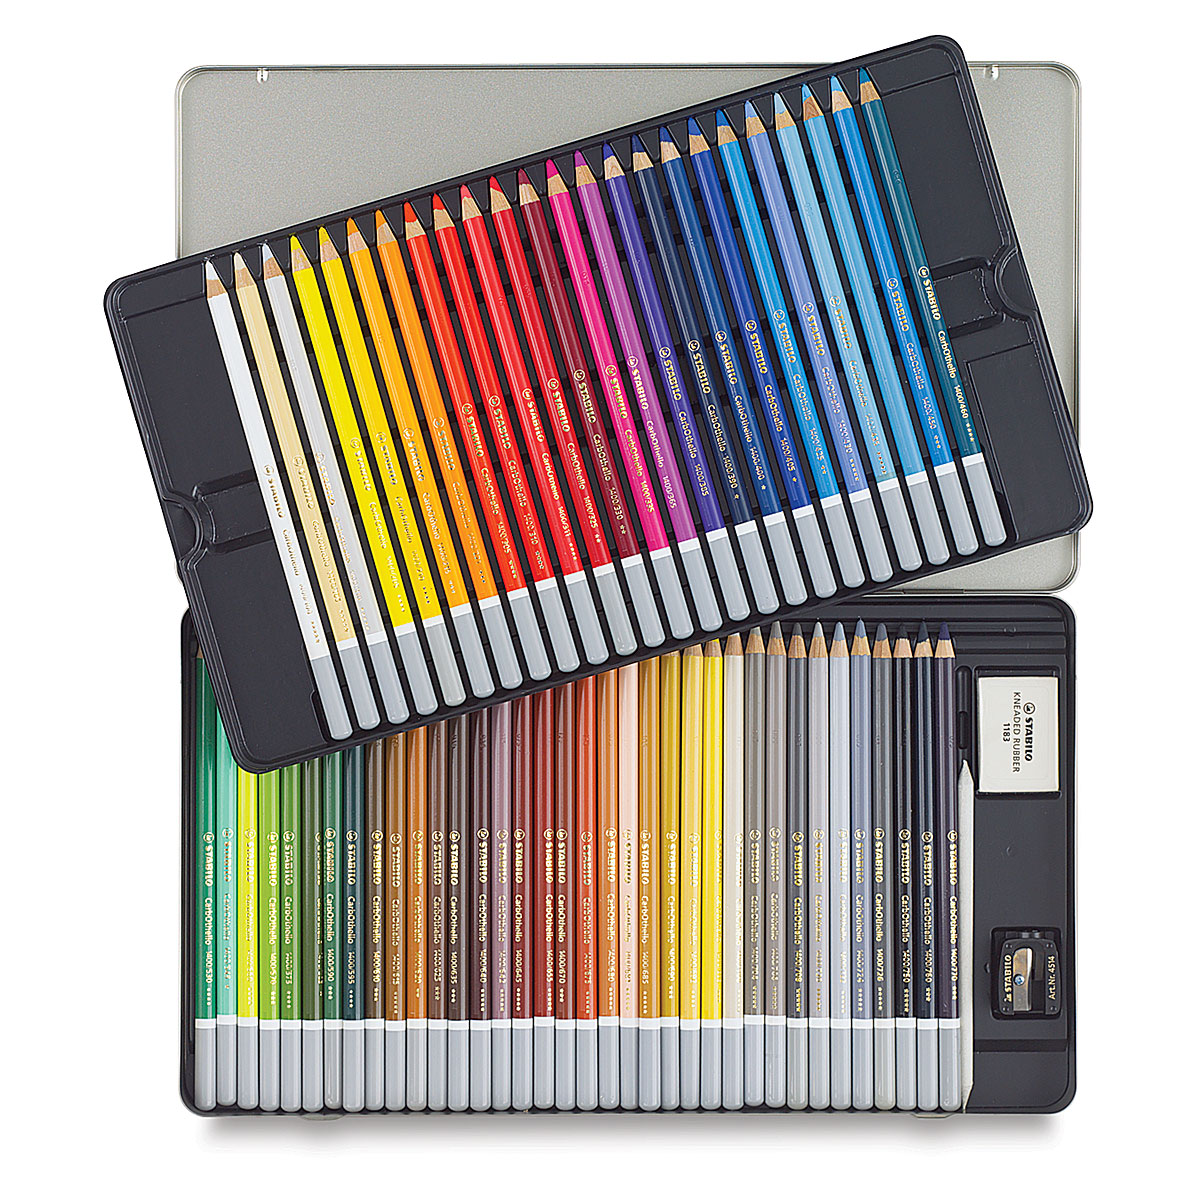 Chalk-pastel pencil STABILO CarbOthello - metal box with 12 colors